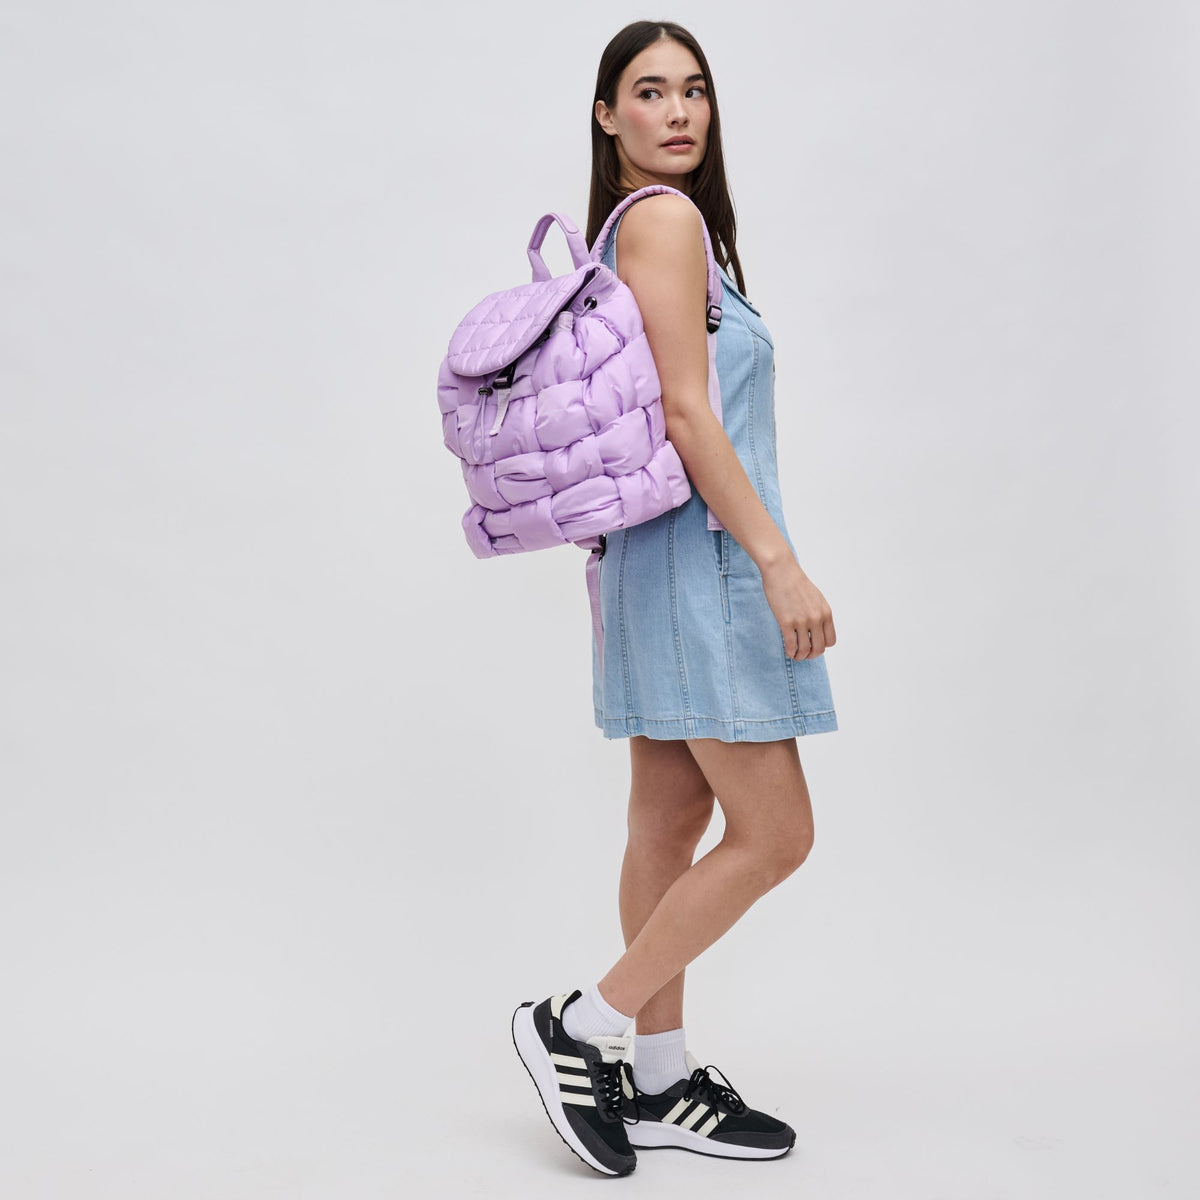 Woman wearing Lilac Sol and Selene Perception Backpack 841764107969 View 3 | Lilac